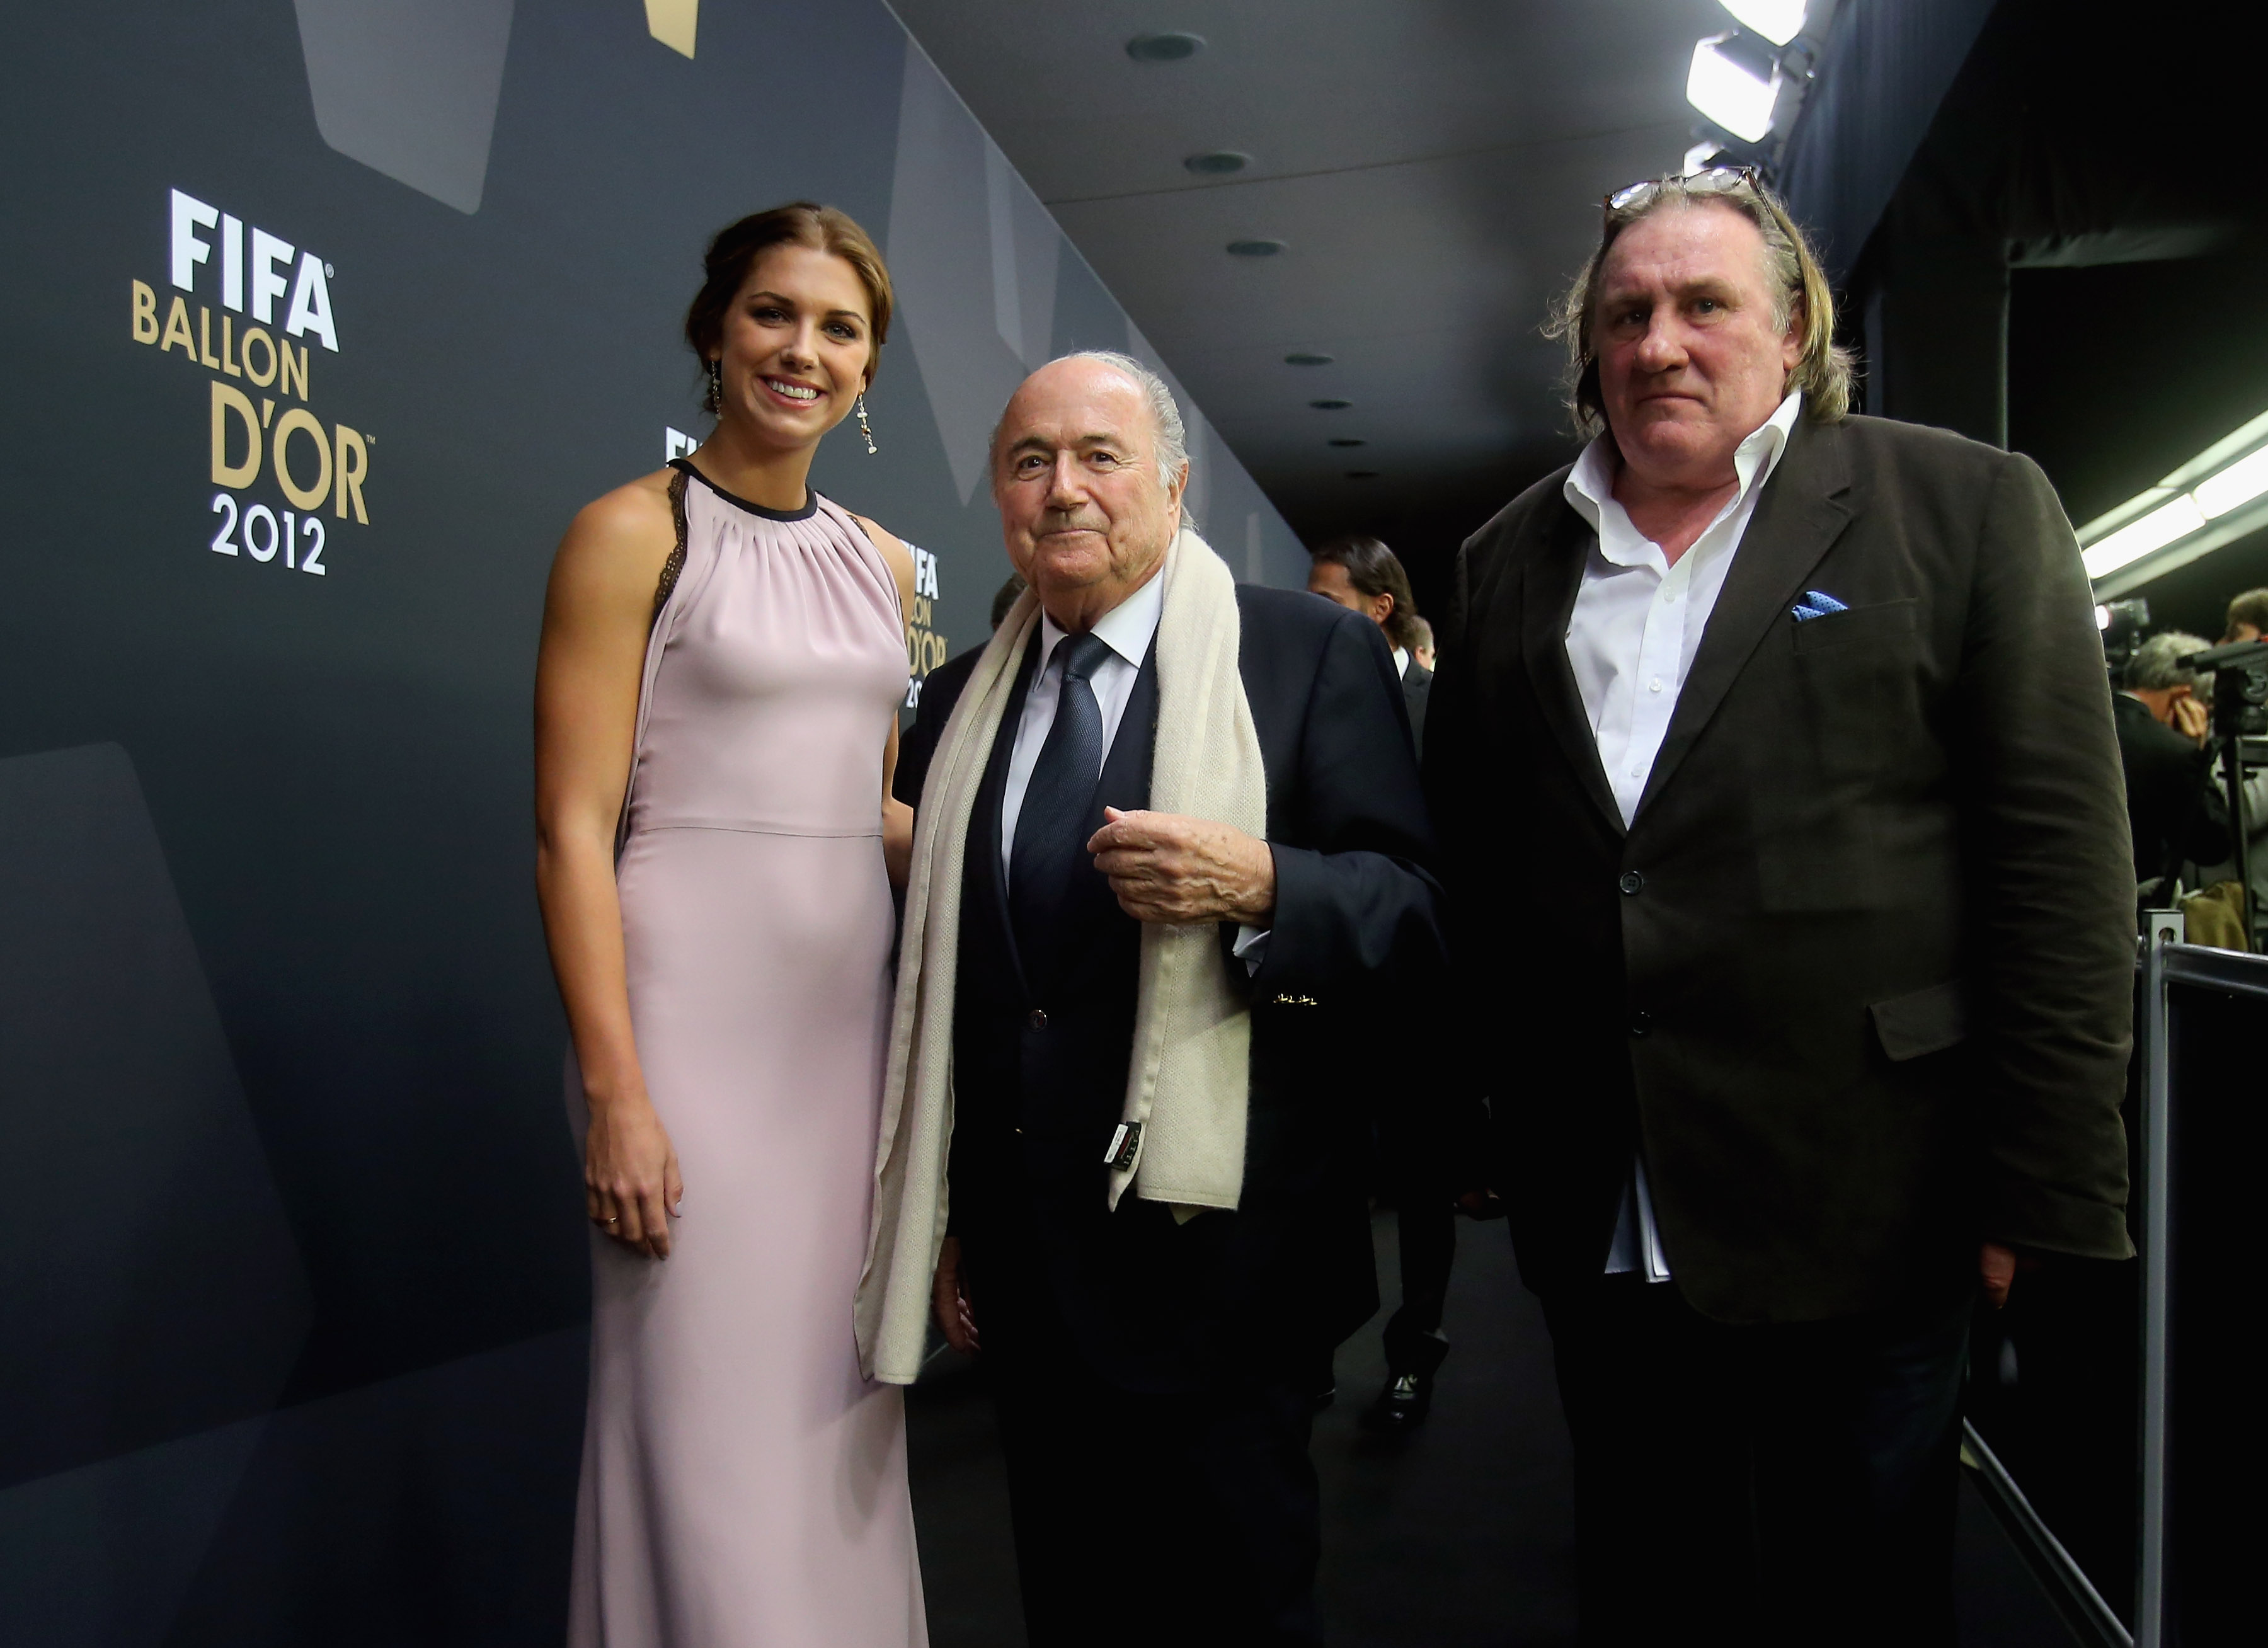 FIFA president Joseph S. Blatter, Alex Morgan and  French actor Gerard Depardieu during the red carpet arrivals at the 2012 FIFA Ballon d'Or Gala in Zurich. (Alexander Hassenstein—FIFA via Getty Images)